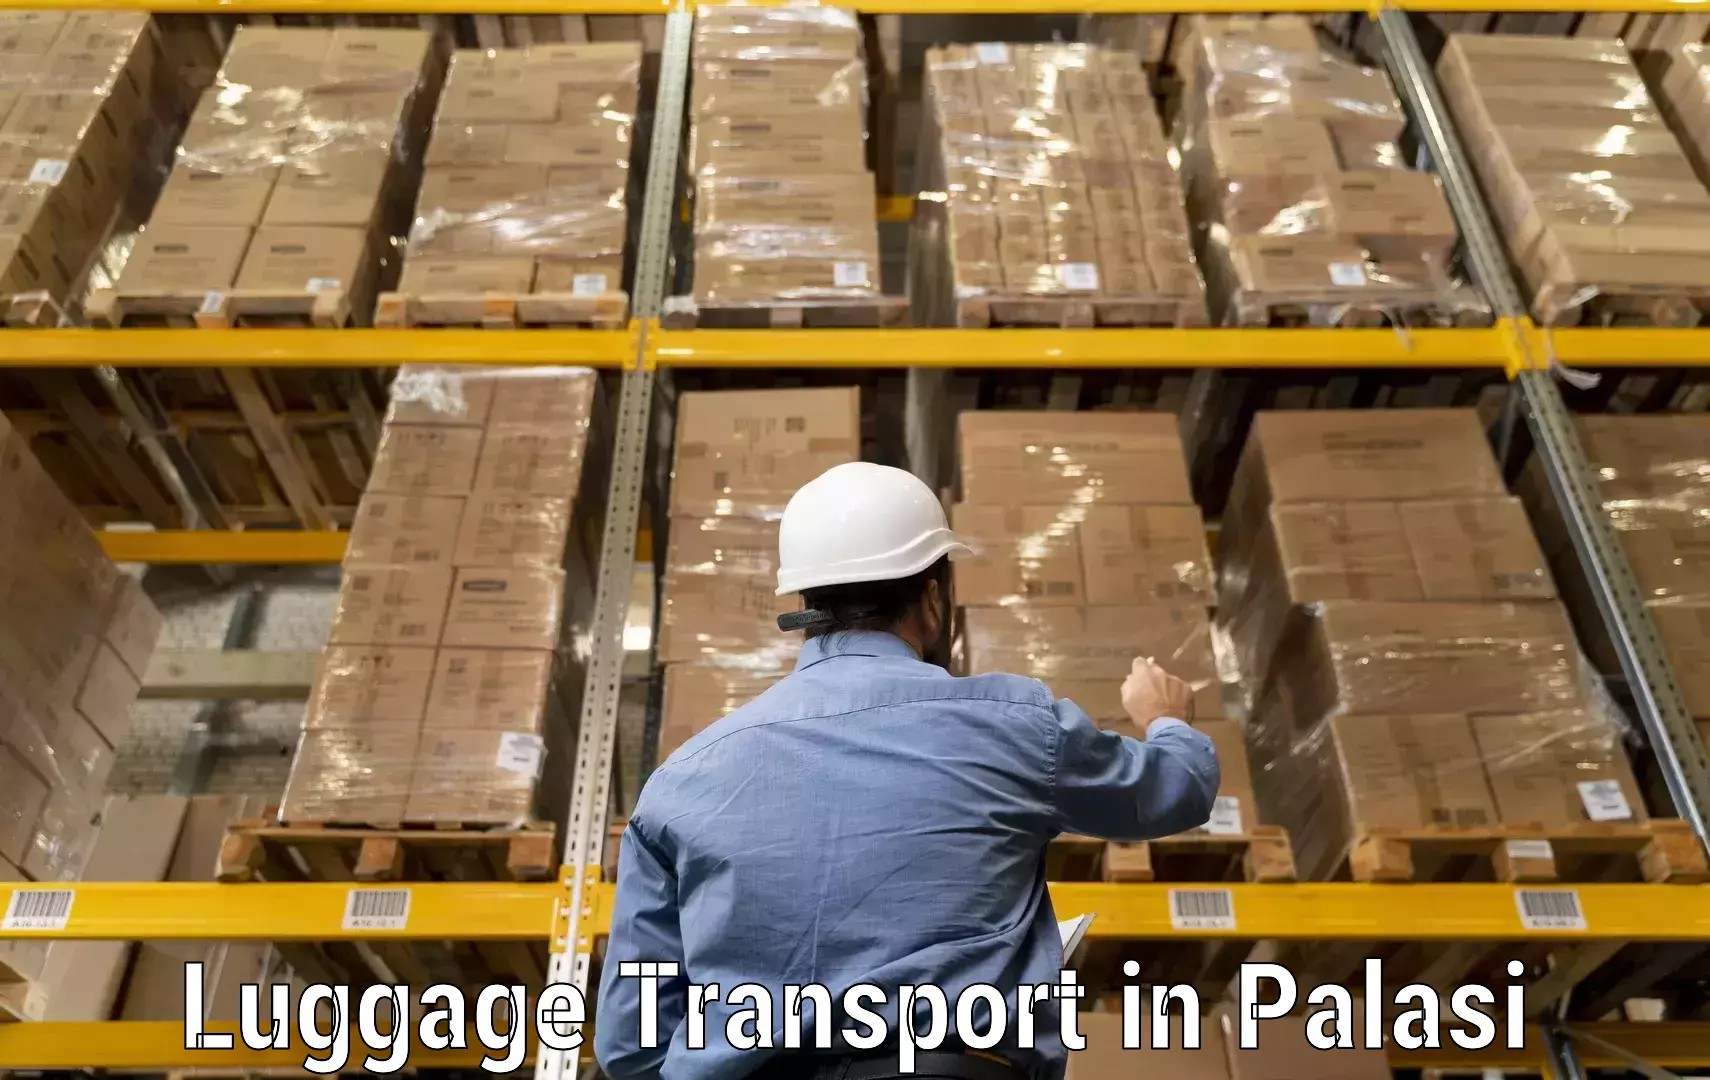 Luggage storage and delivery in Palasi